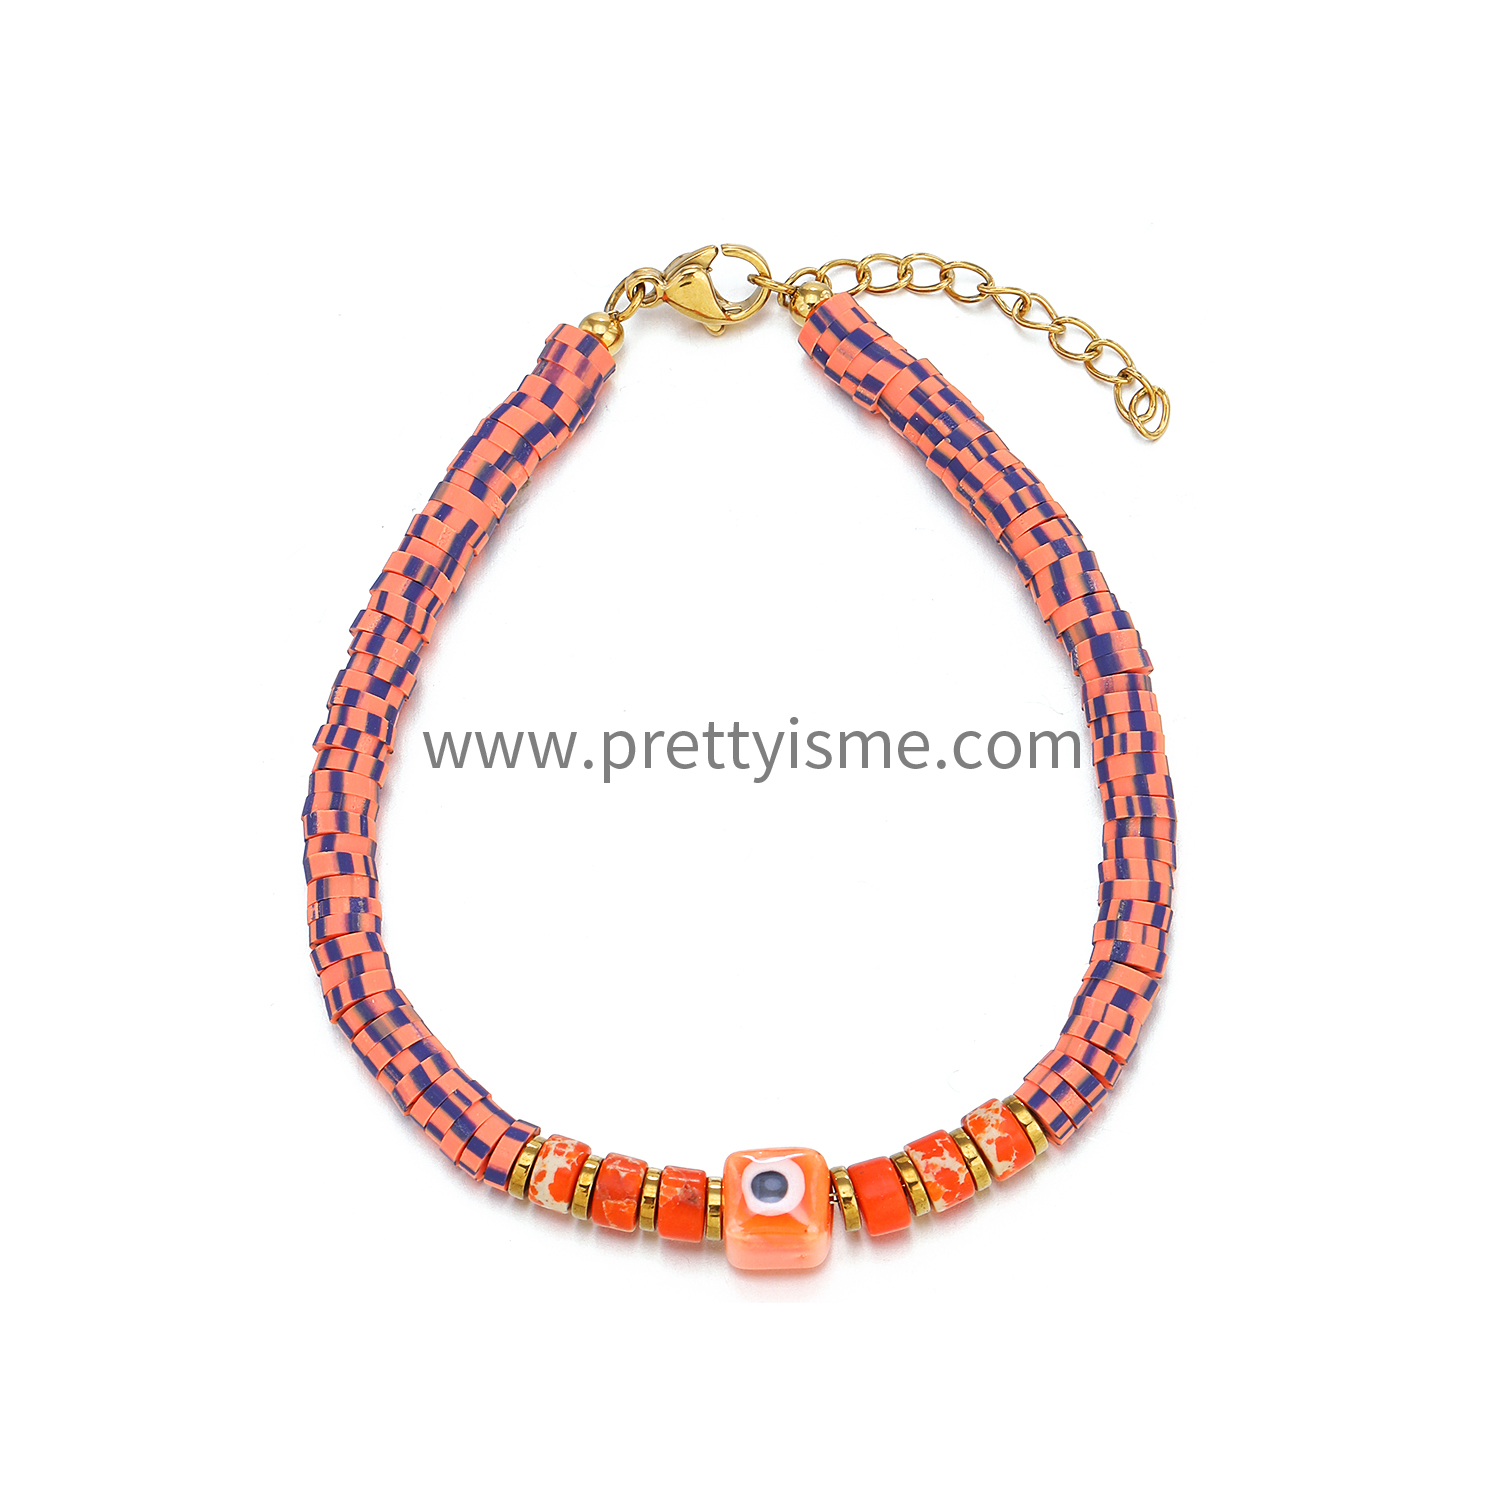 Pretty Is Me Collection 18K Gold Plated 316L Stainless Steel Beads Stone Ceramics Eye Charm Orange Polymer Clay Bracelet Women (6).webp